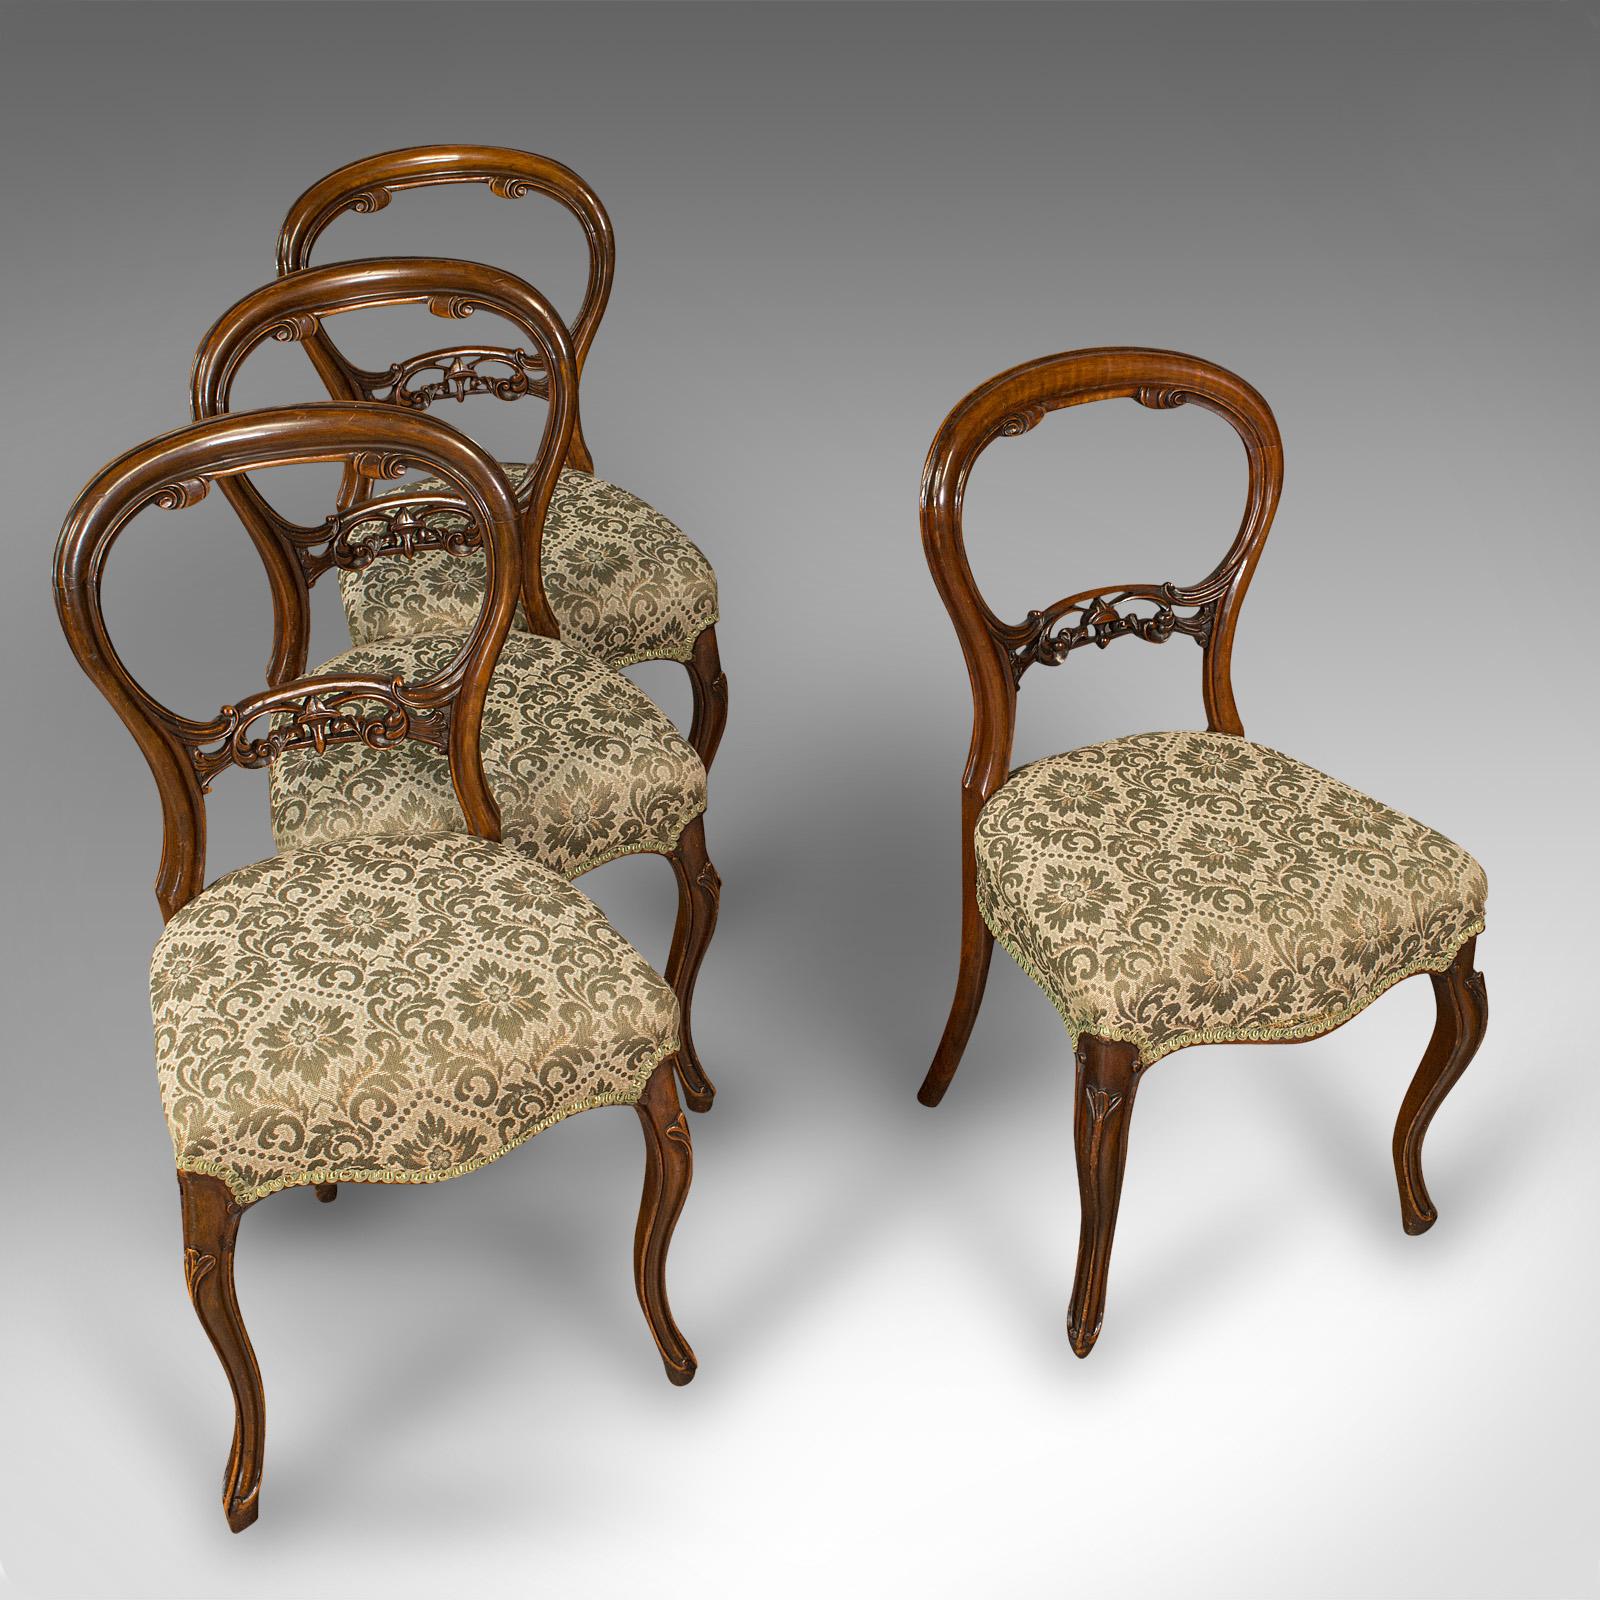 Set of 4 Antique Dining Chairs, English, Walnut, Balloon Back, Victorian, 1850 1